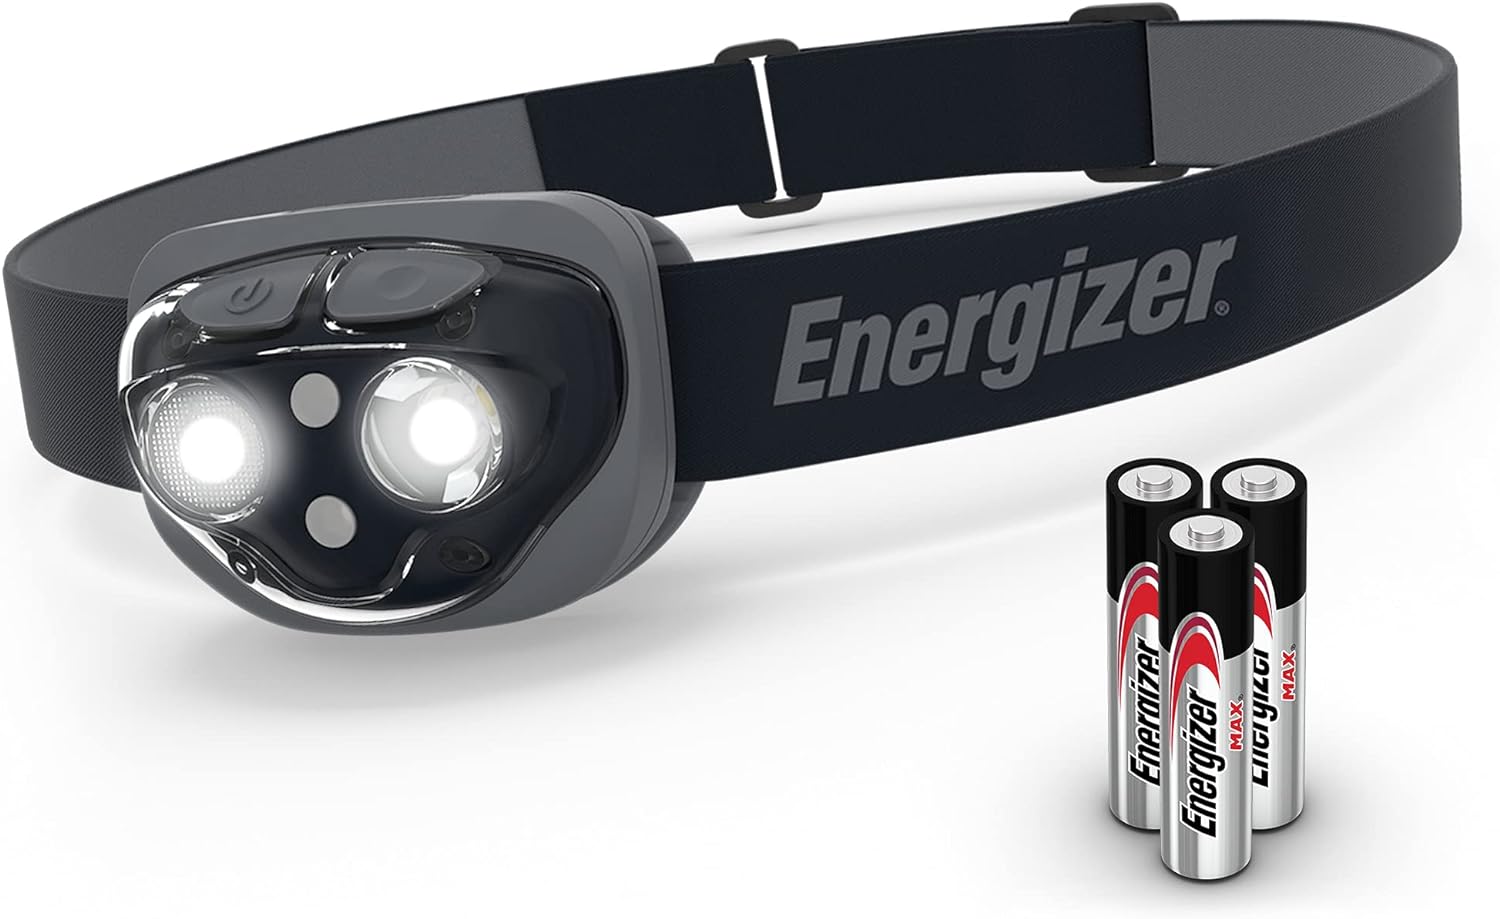 ENERGIZER LED Headlamp Pro360, Rugged IPX4 Water Resistant Head Light, Ultra Bright Headlamps for Running, Camping, Outdoor, St